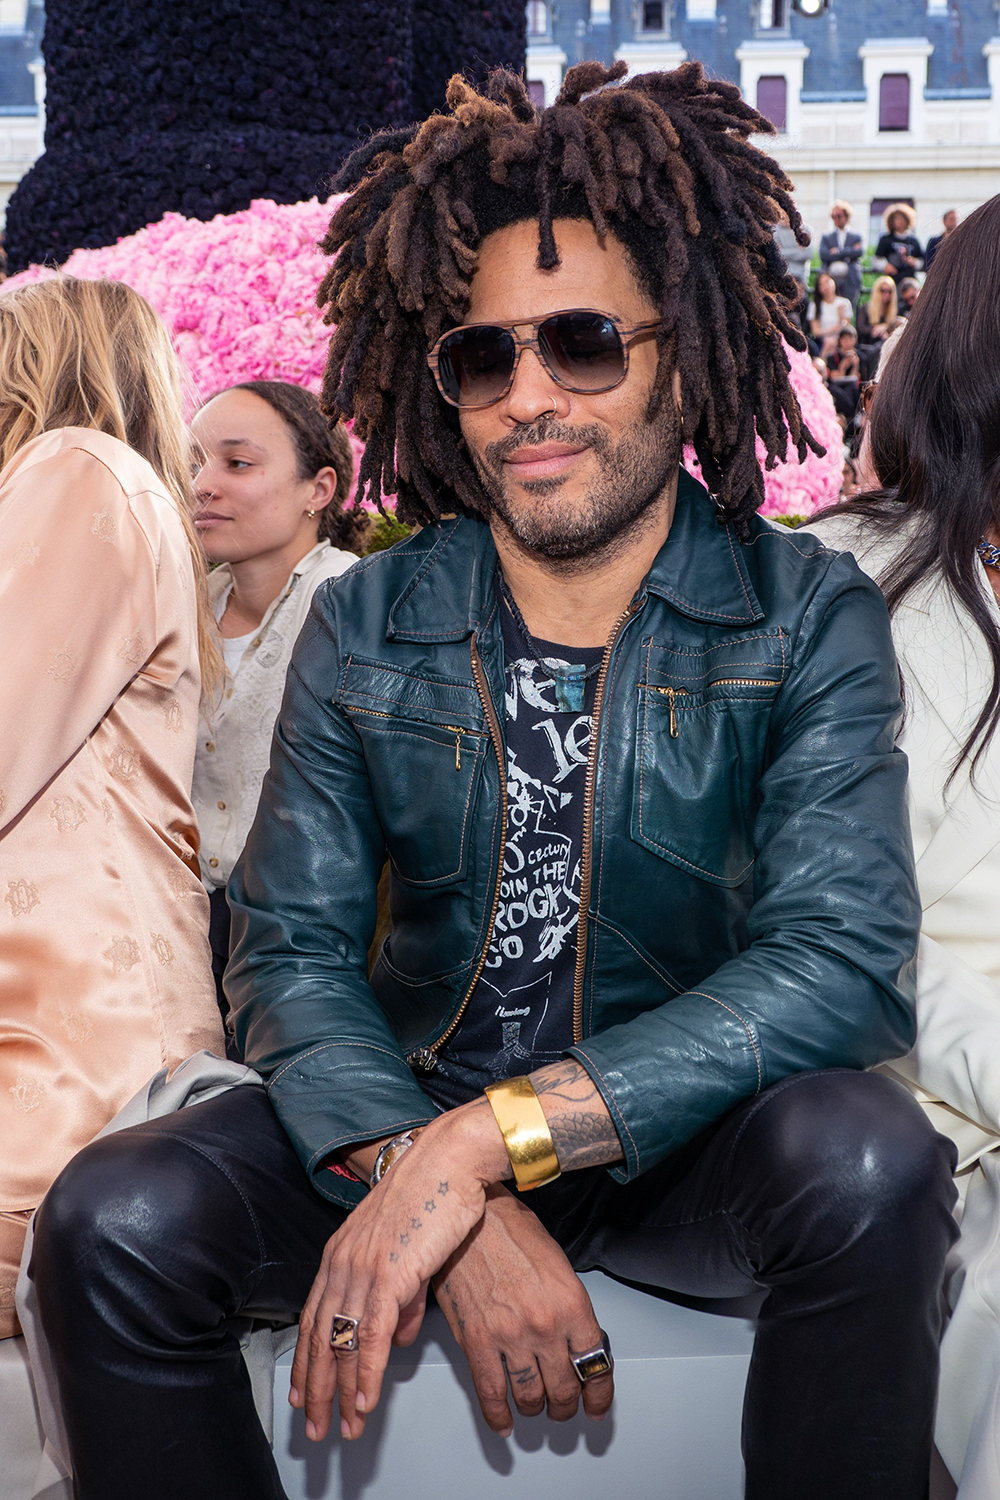 <p>Lenny Kravitz in the front row of the Dior Homme show at Men’s Paris Fashion Week on Jun. 23, 2018. His teal leather jacket was quite striking.</p>